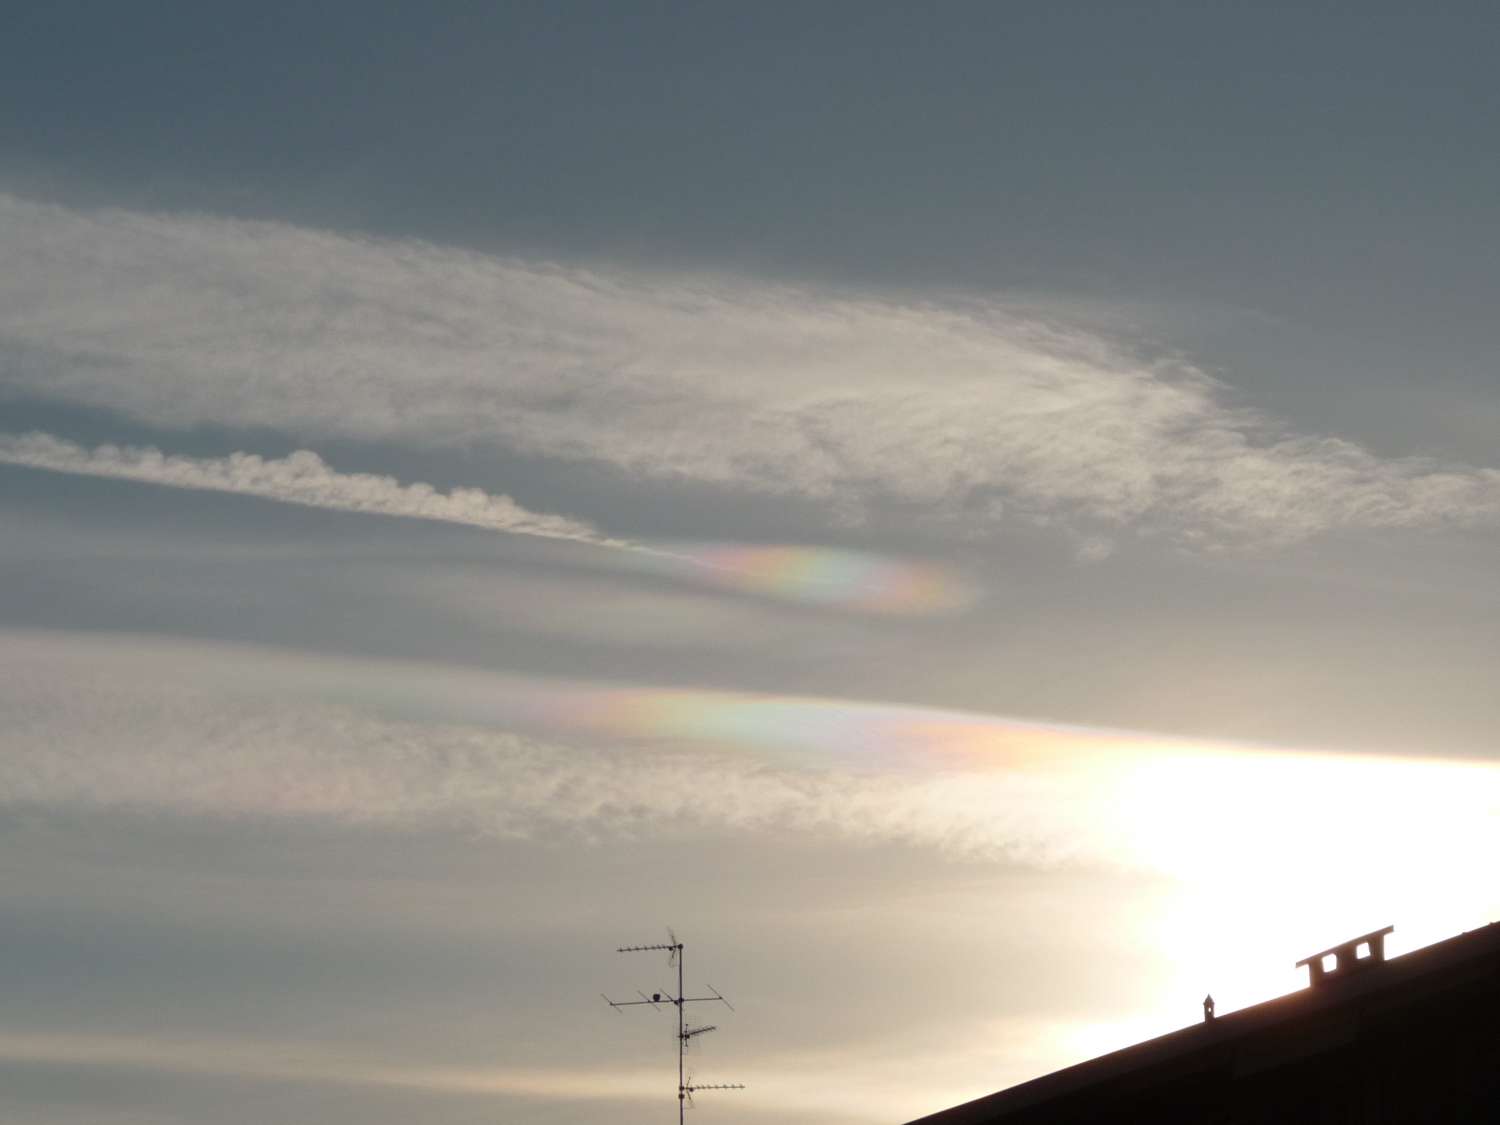 Iridescent clouds: 49 KB; click on the image to enlarge